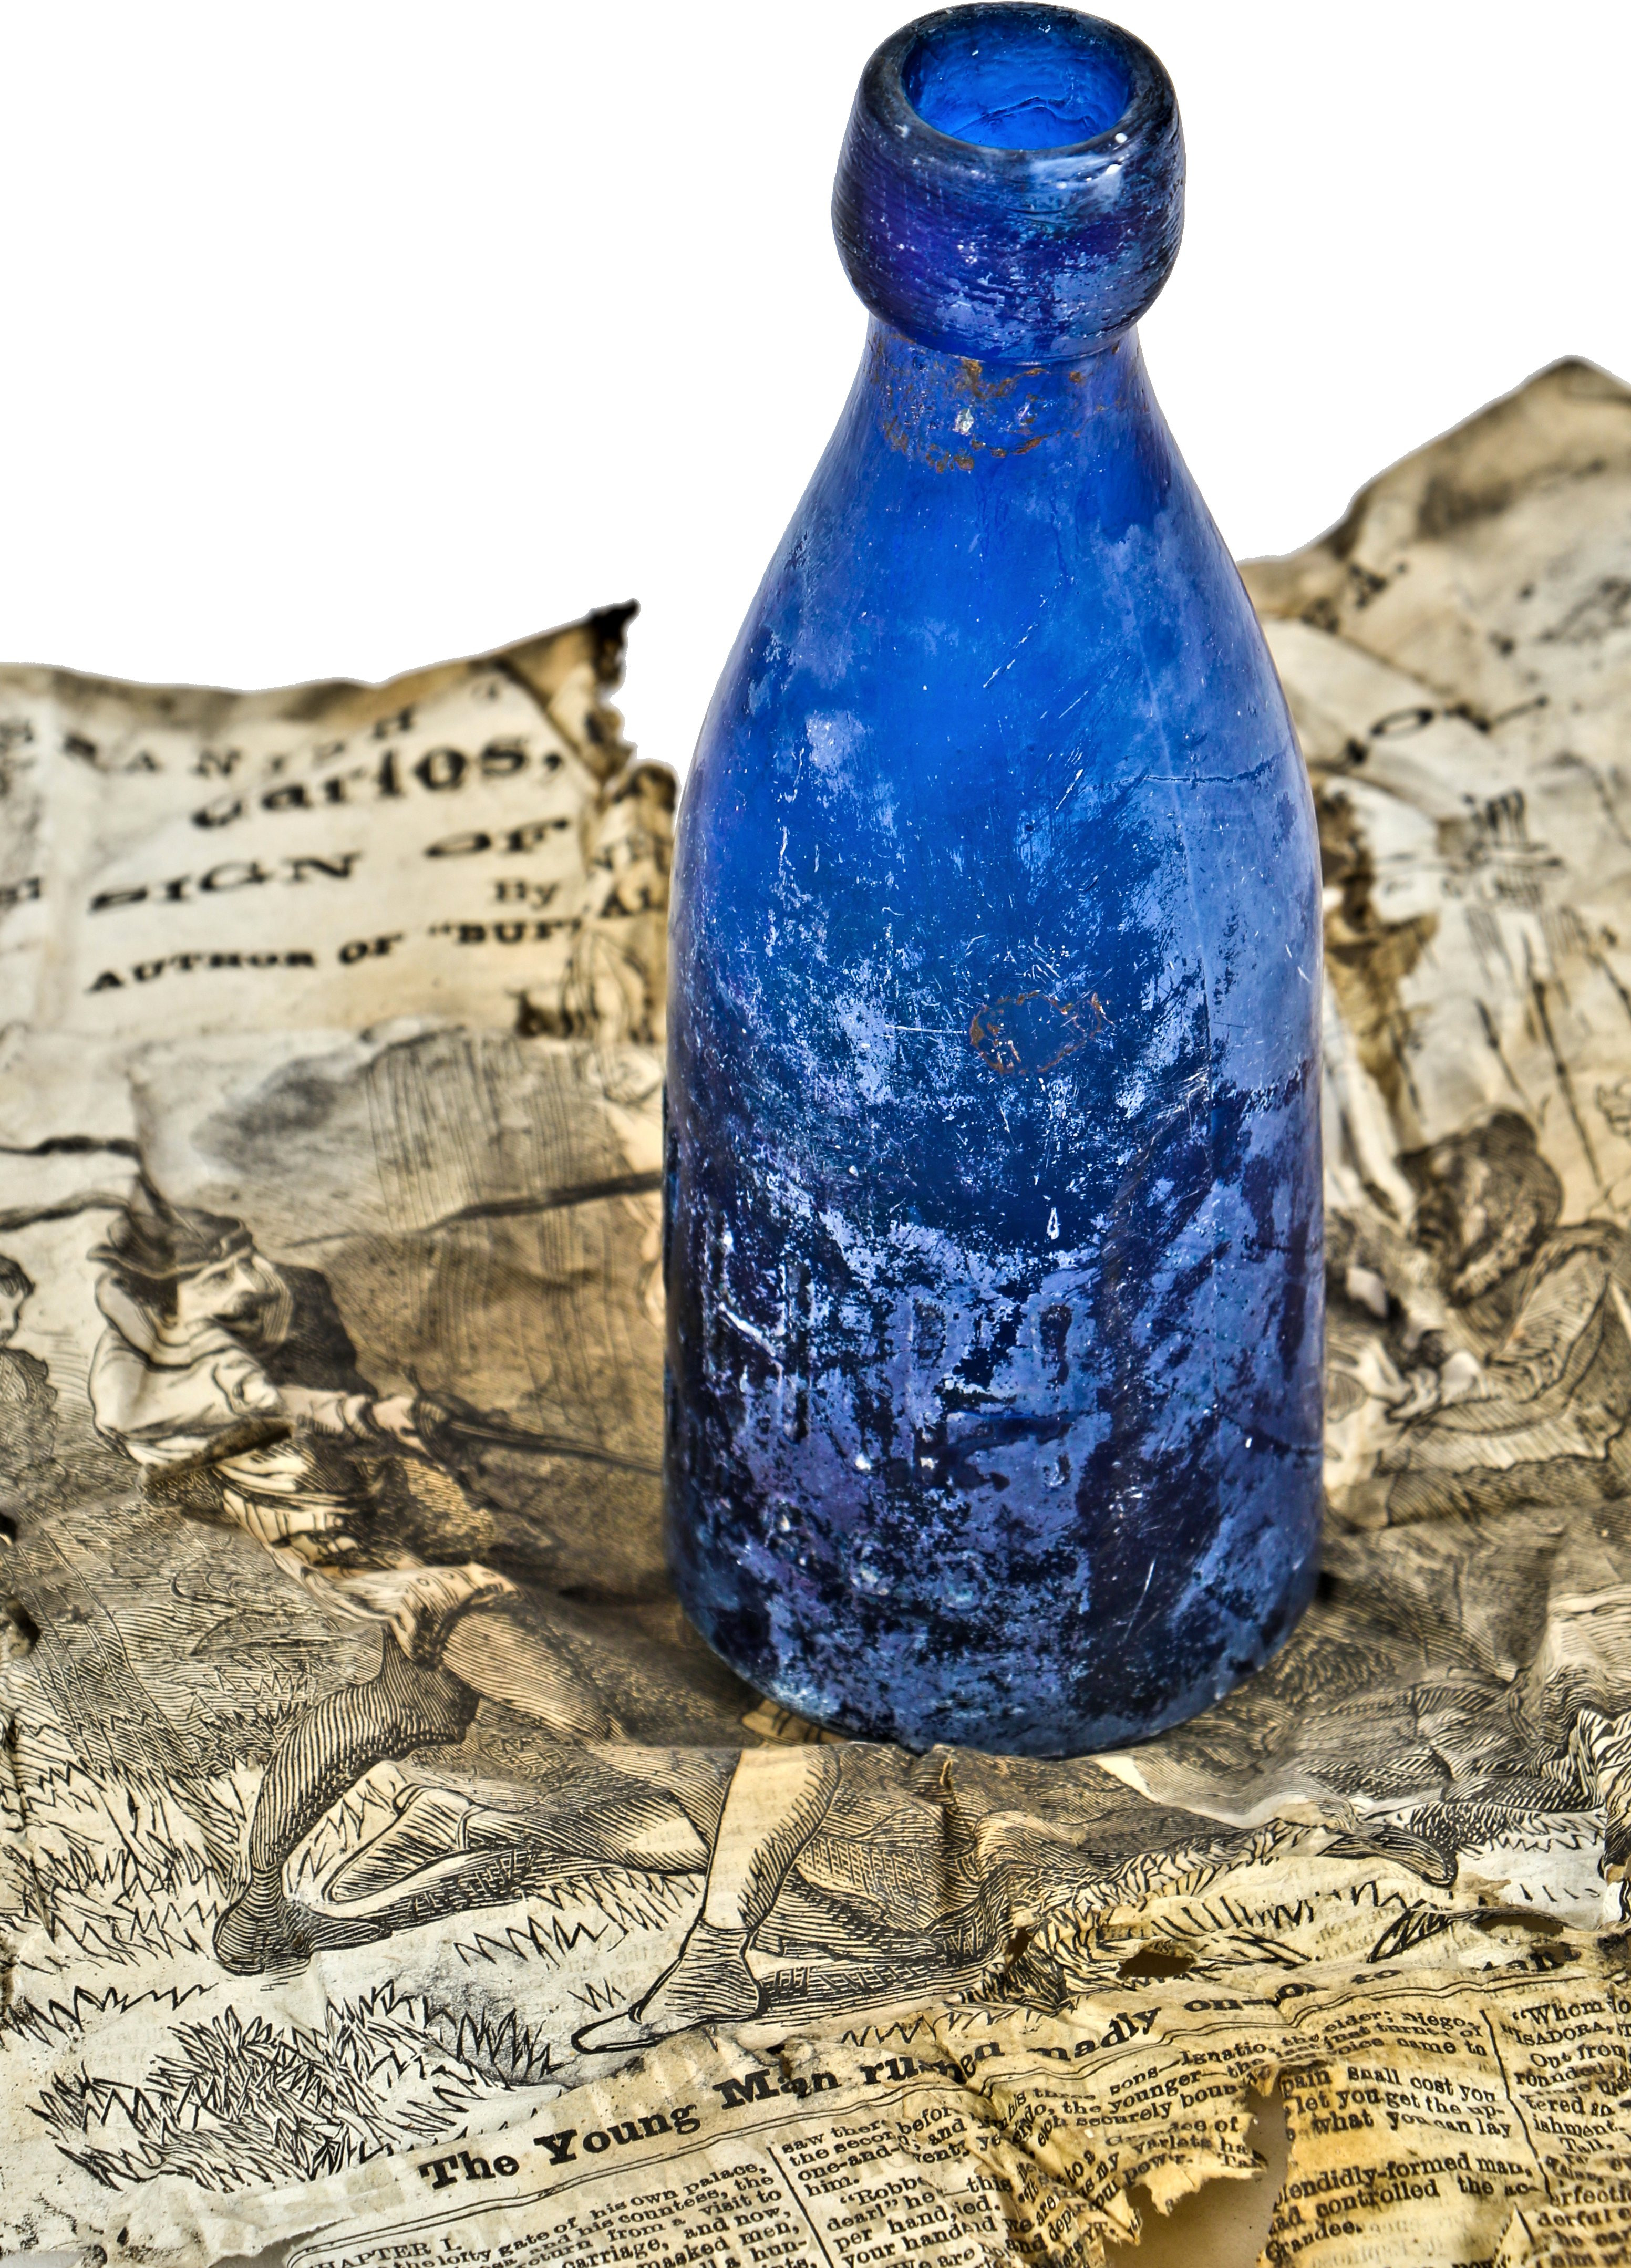 29 Fashionable Cobalt Blue Glass Vases and Bottles 2024 free download cobalt blue glass vases and bottles of rare 1850s teal colored ainsworth and lomax glass bottle recently pertaining to addthis sharing buttons